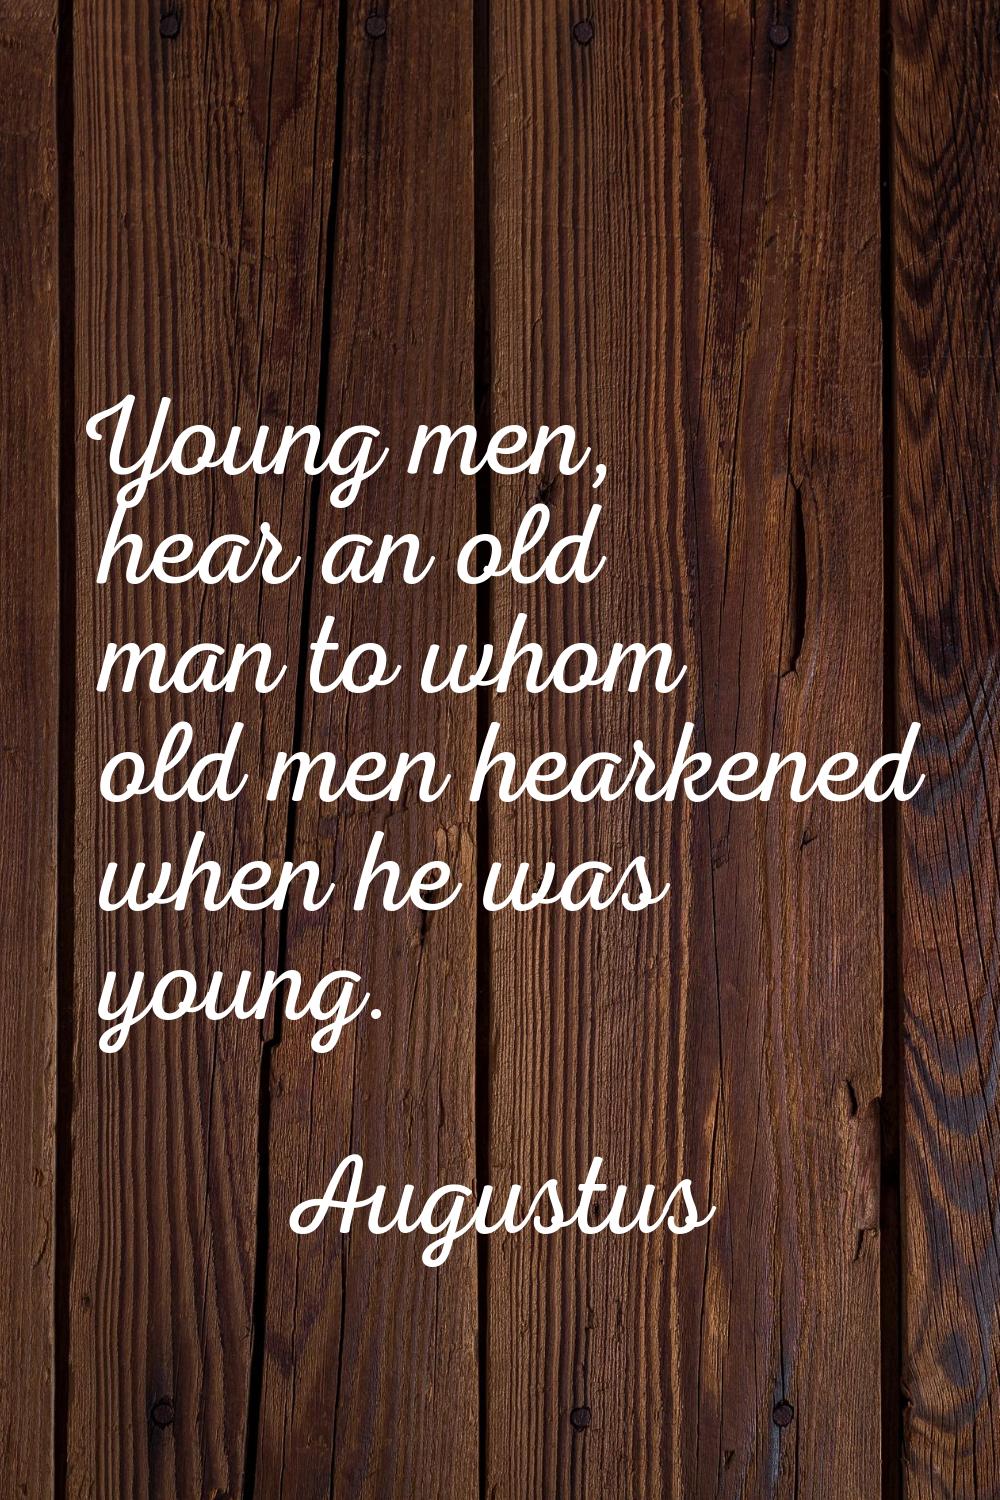 Young men, hear an old man to whom old men hearkened when he was young.